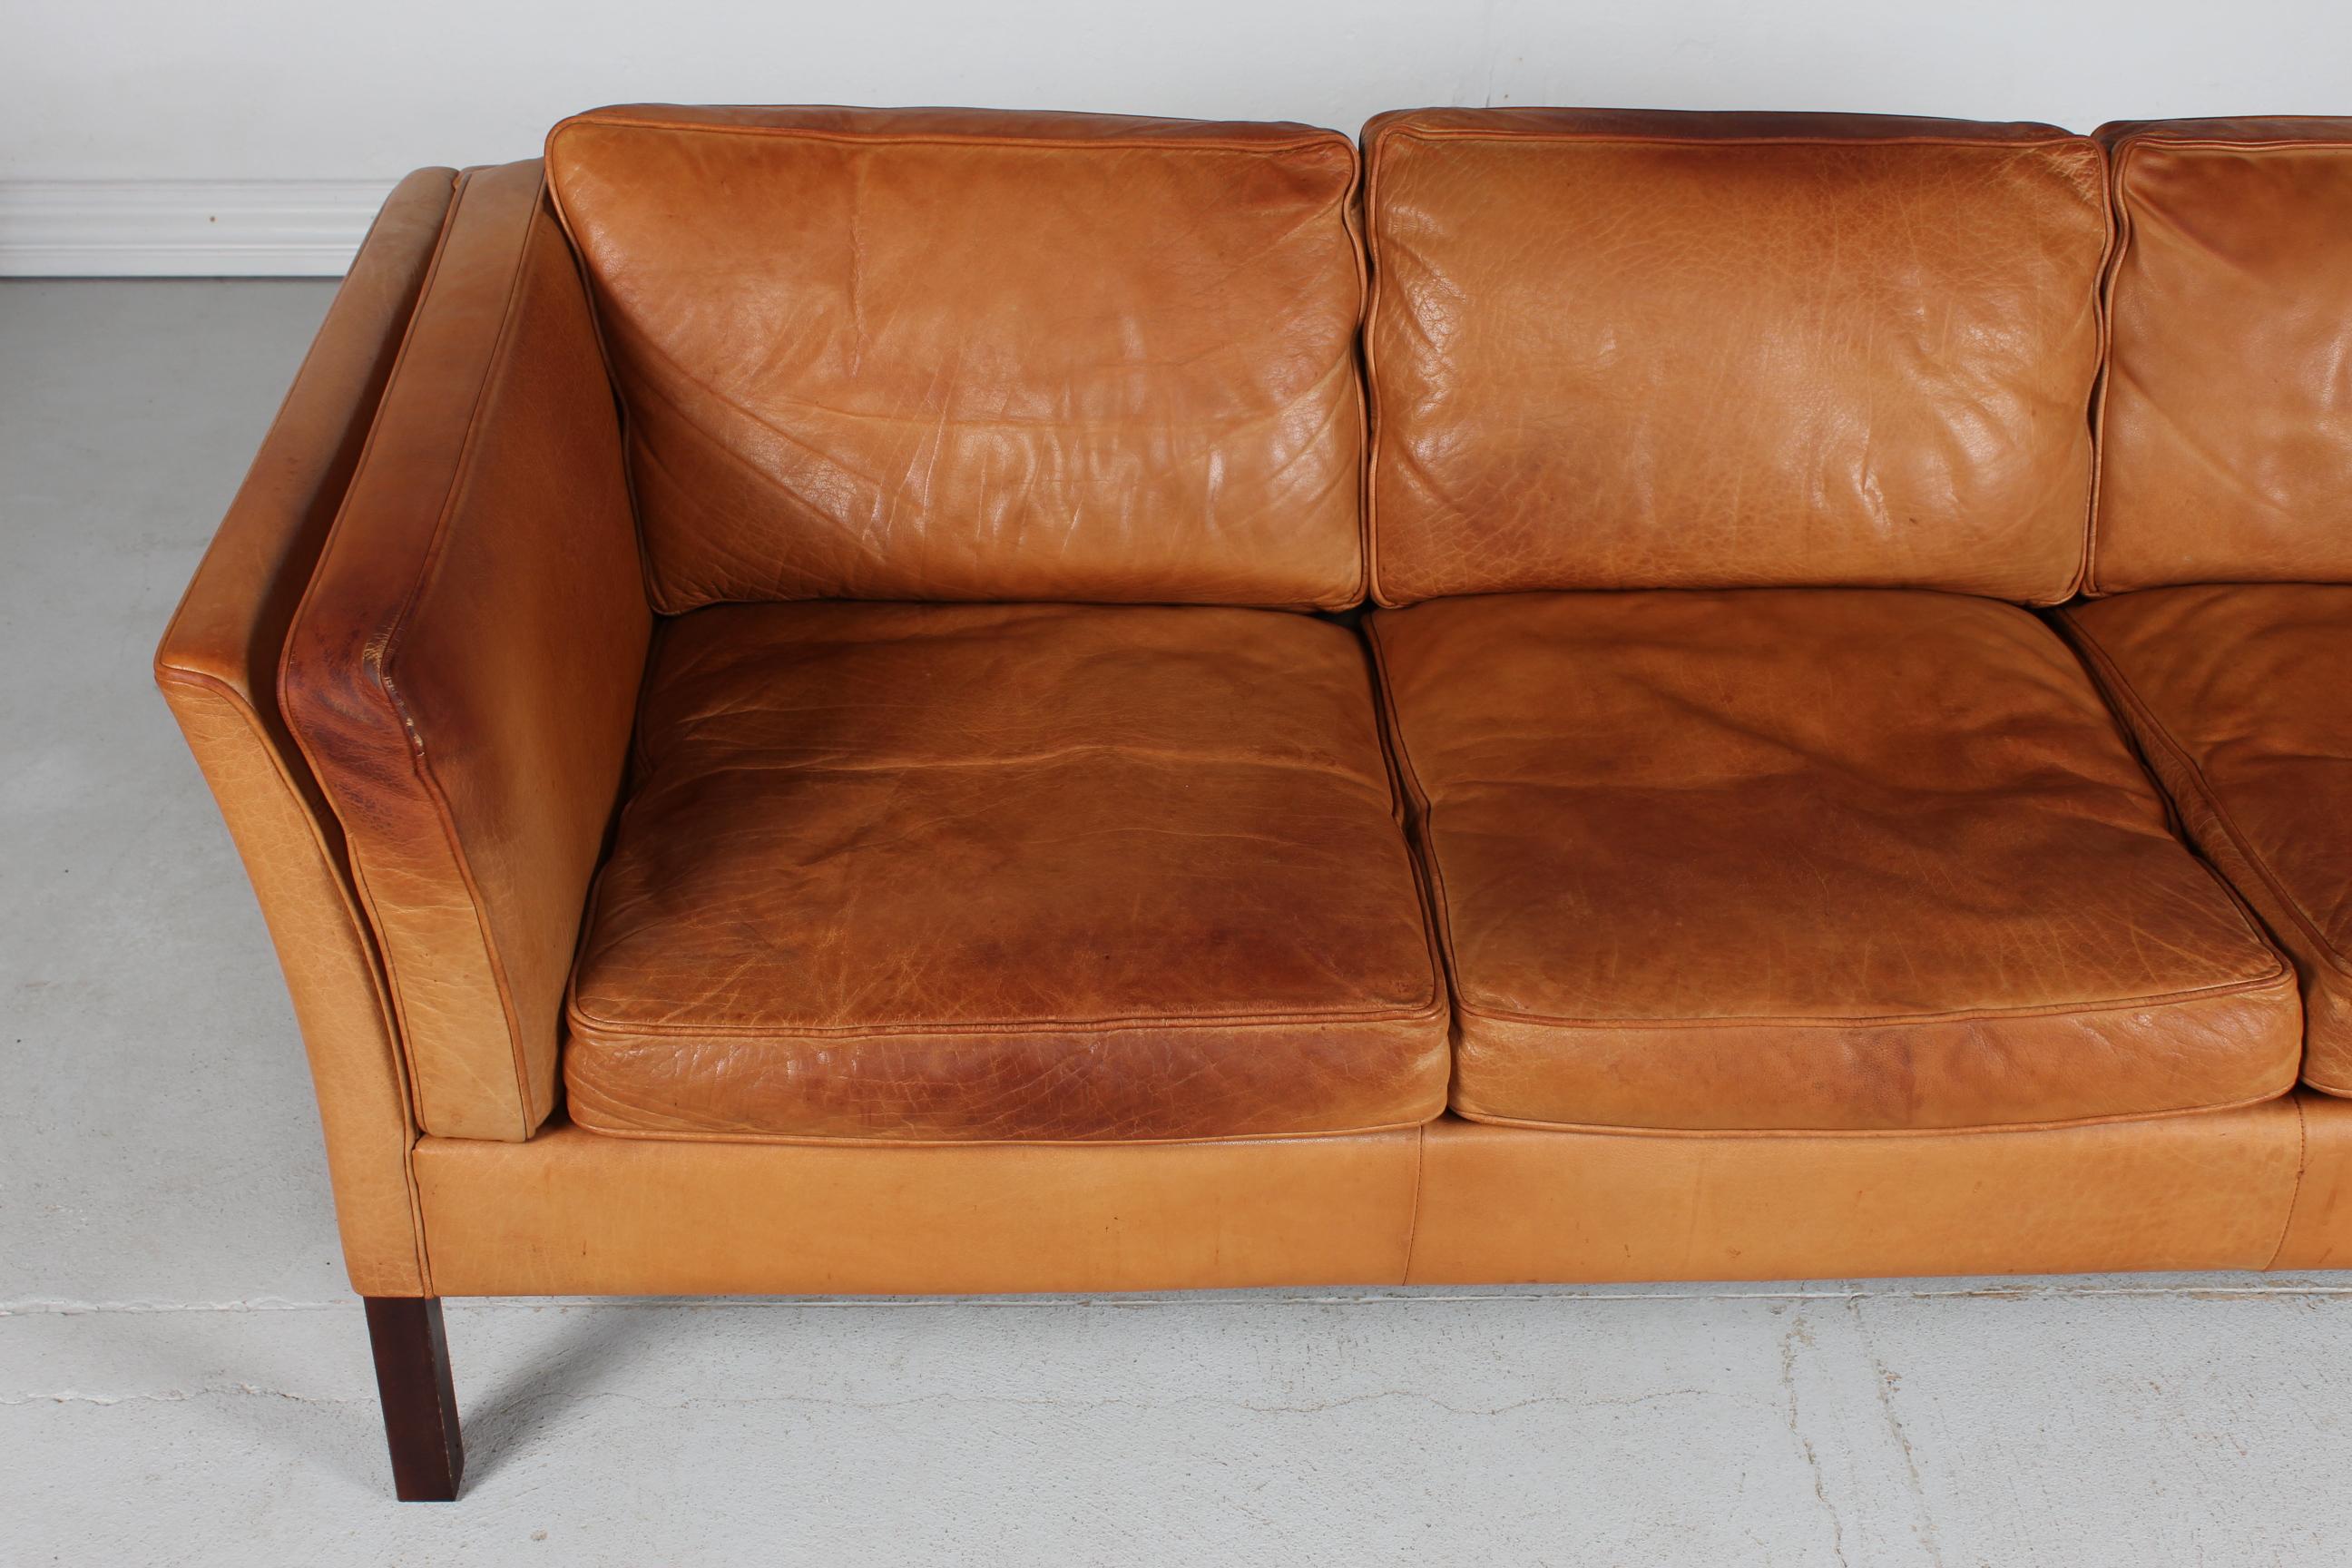 Danish Modern 3-Seat Sofa with Patinated Cognac-Colored Leather 1970s by Stouby 4